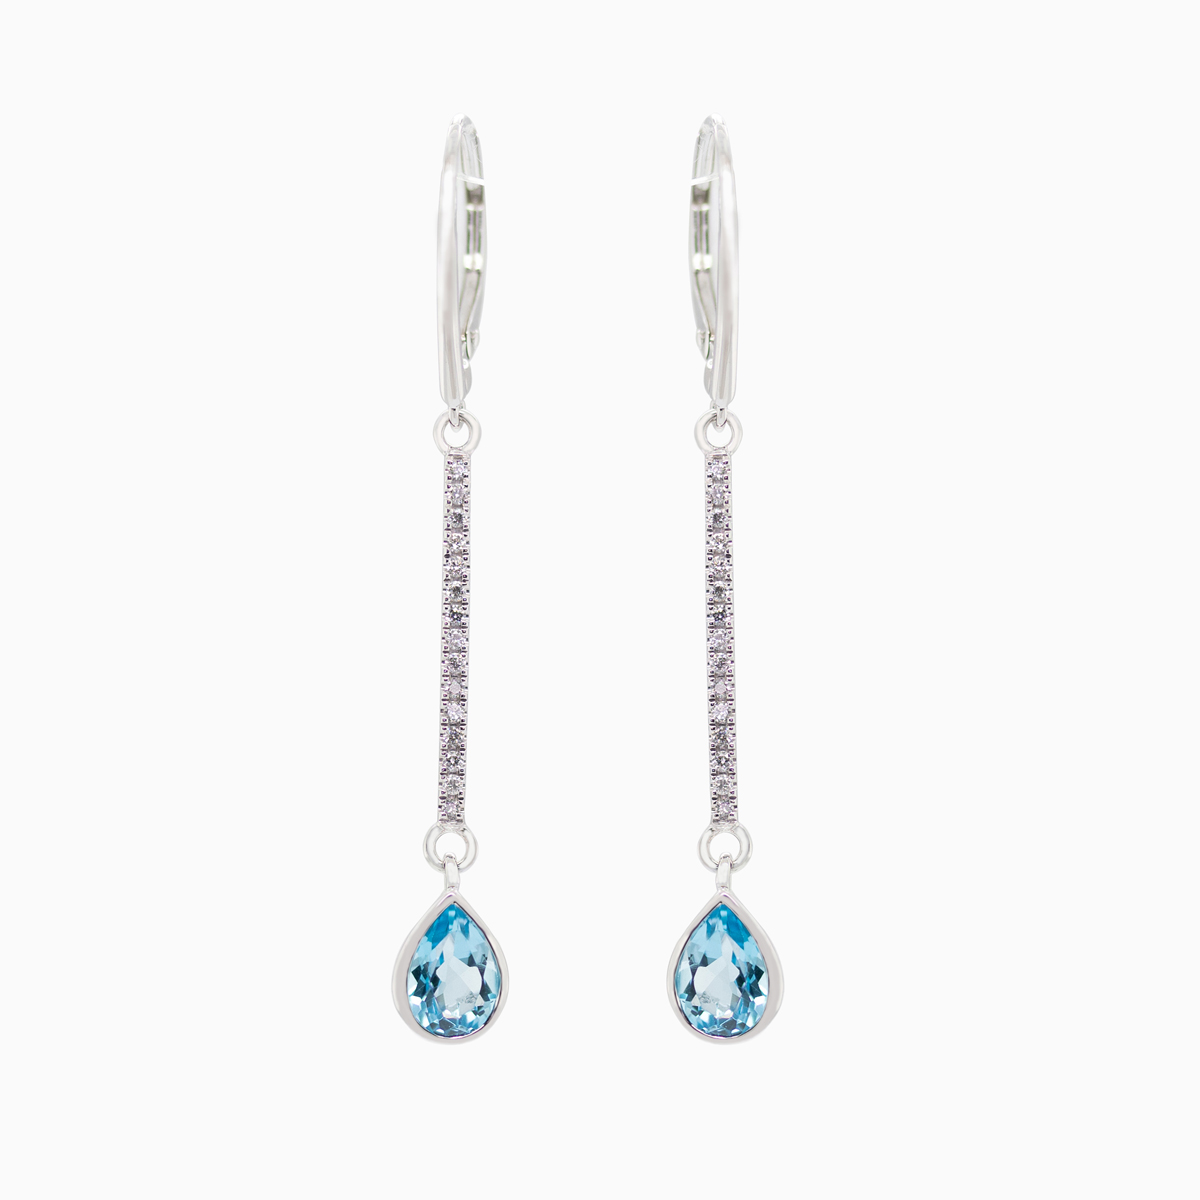 Natural Blue Topaz and Diamond Drop Earrings, 14k White Gold